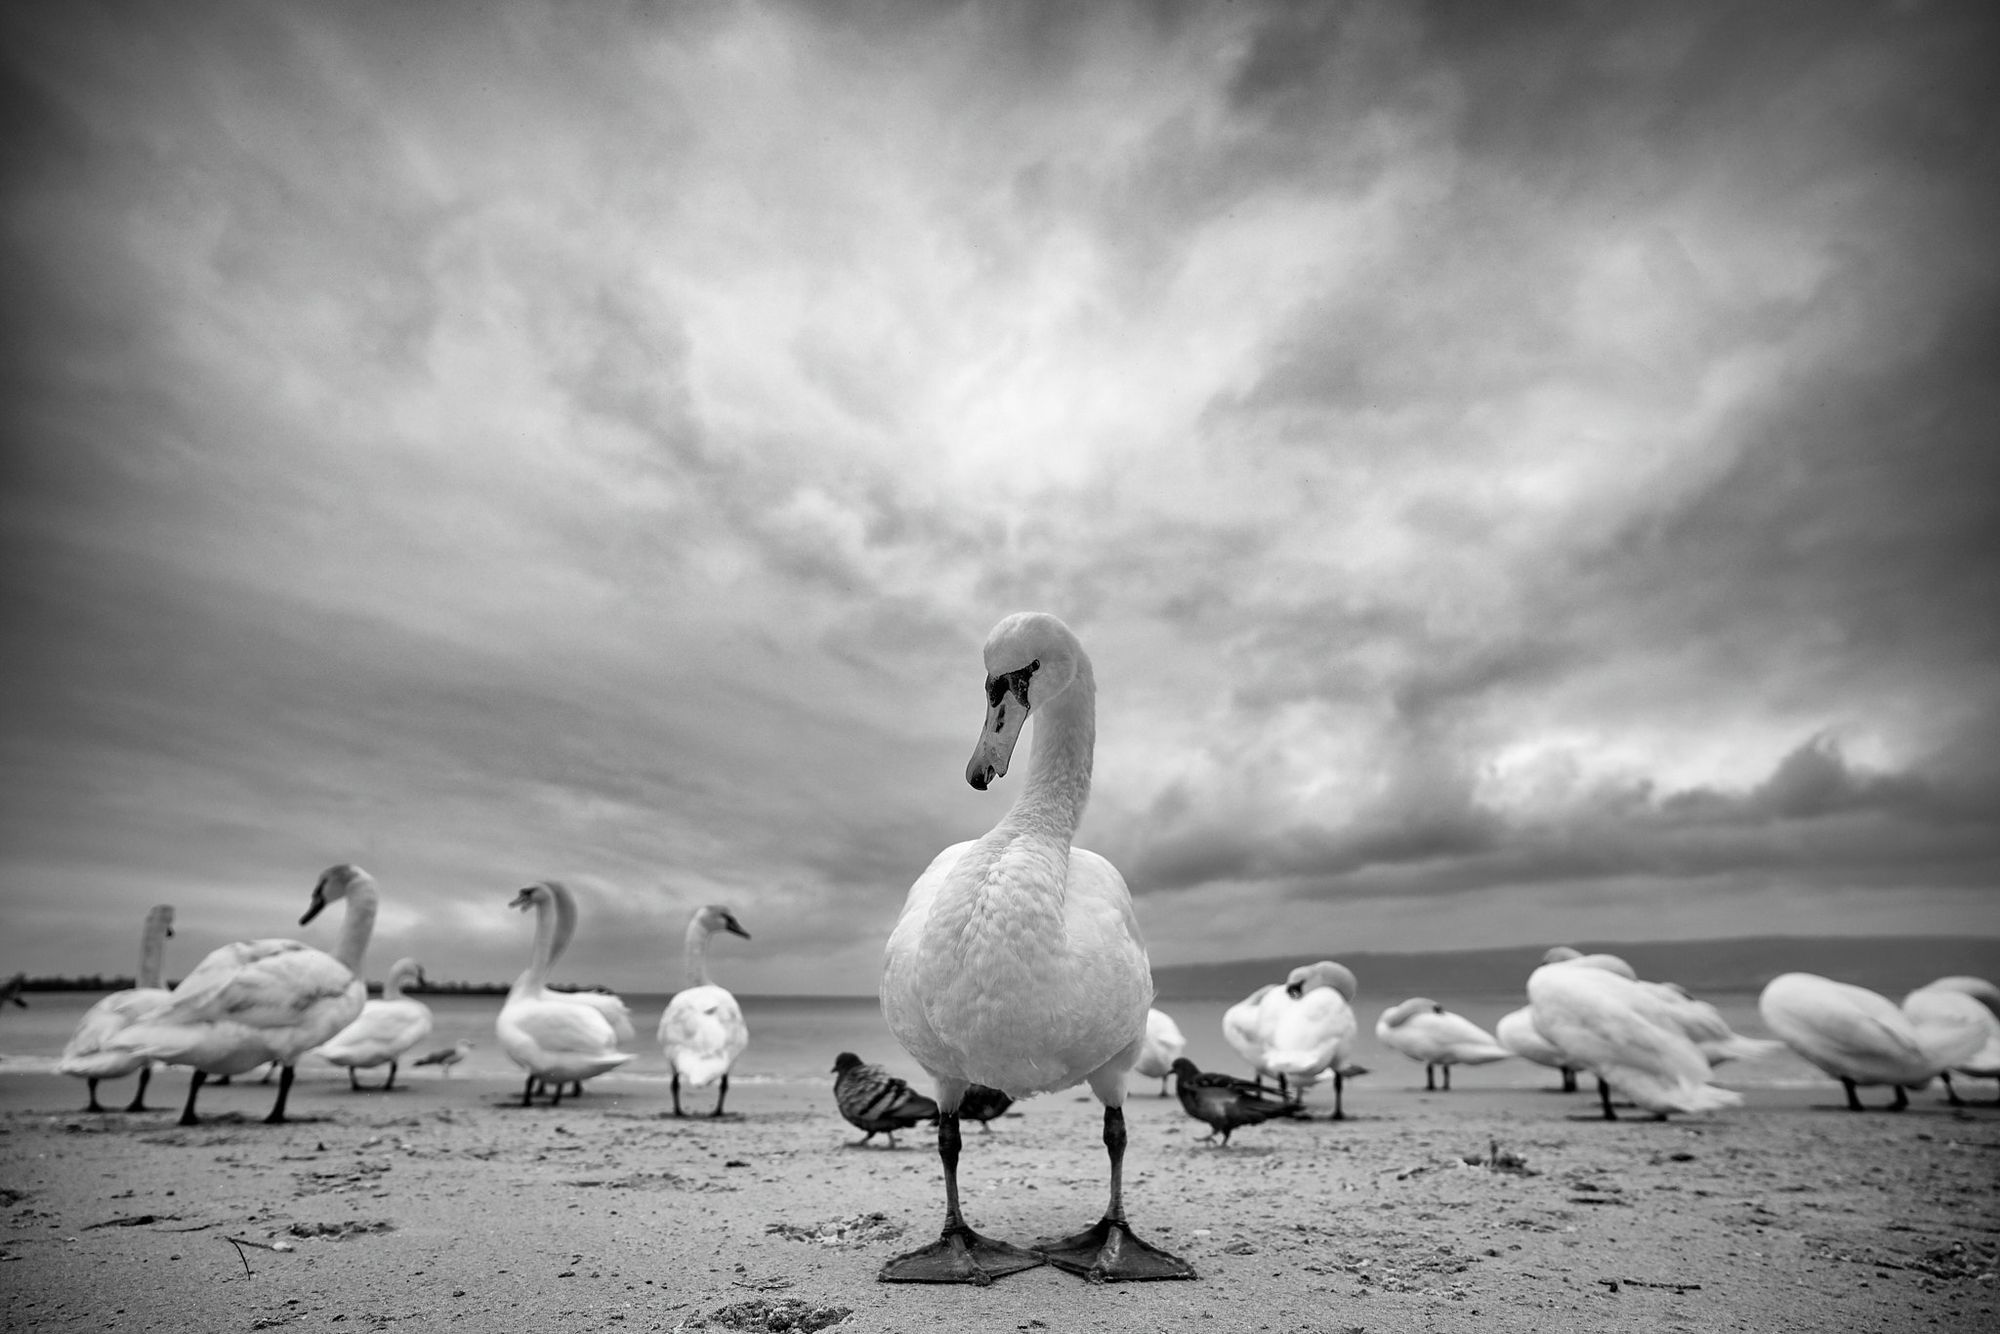 Swans on a beach in black and white